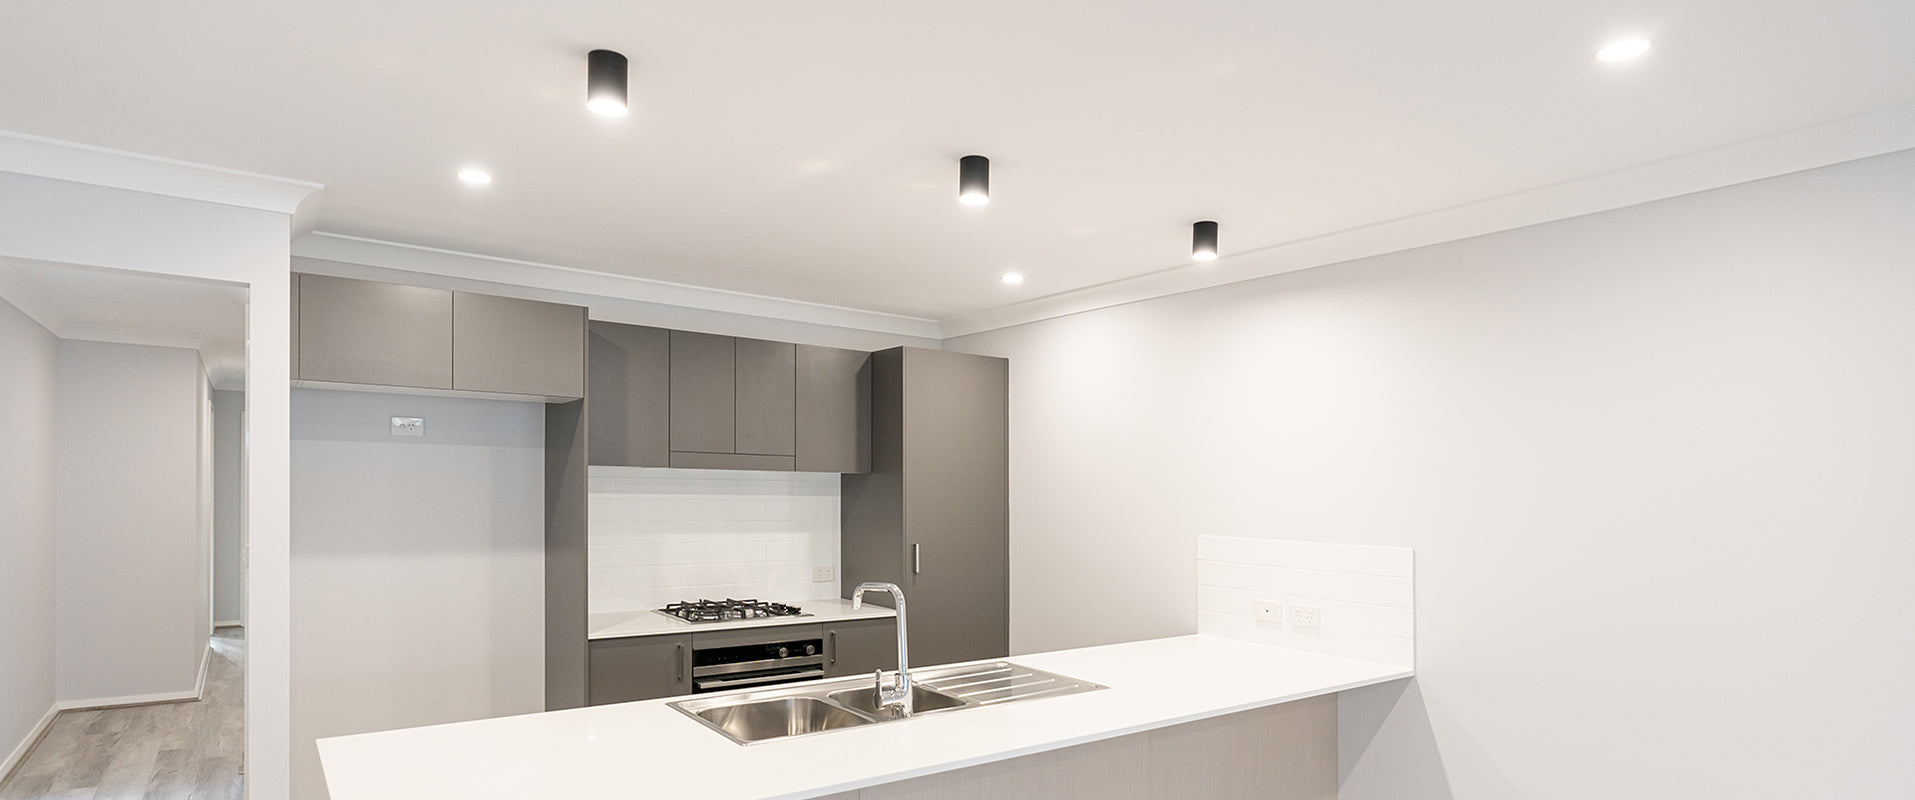 Surface Mounted LED Downlights